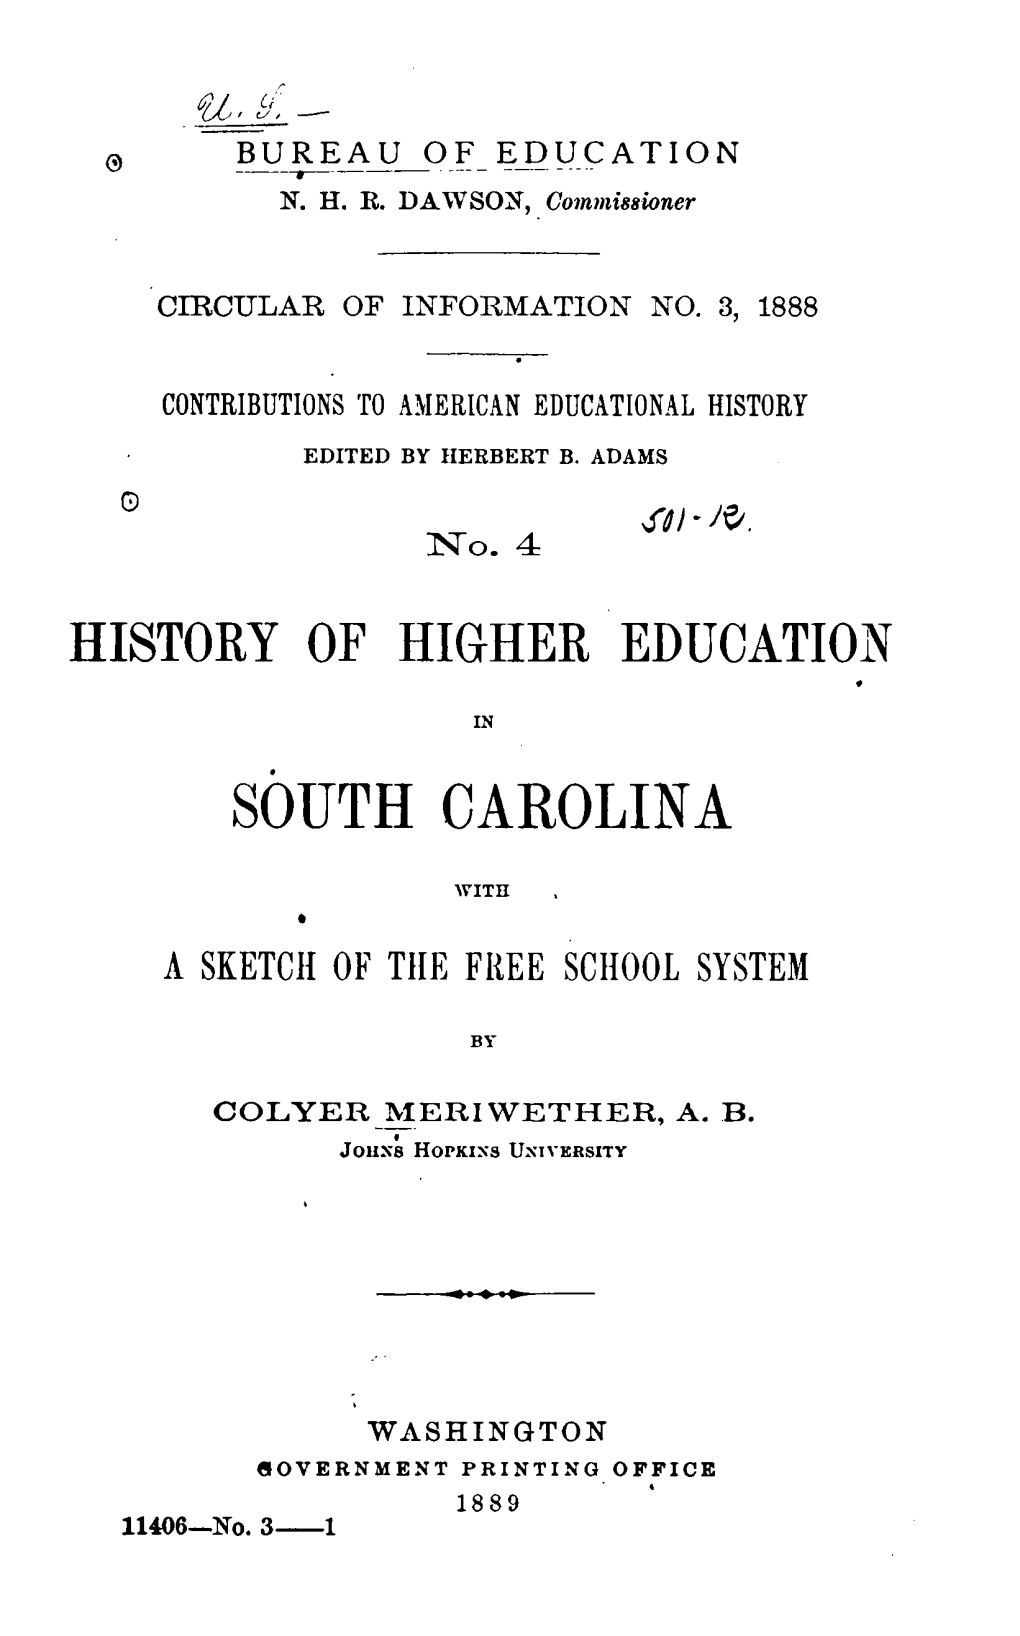 History of Higher Education in South Carolina, His Native State, and to Give a Sketch of the Development of the Free, Or Public School System